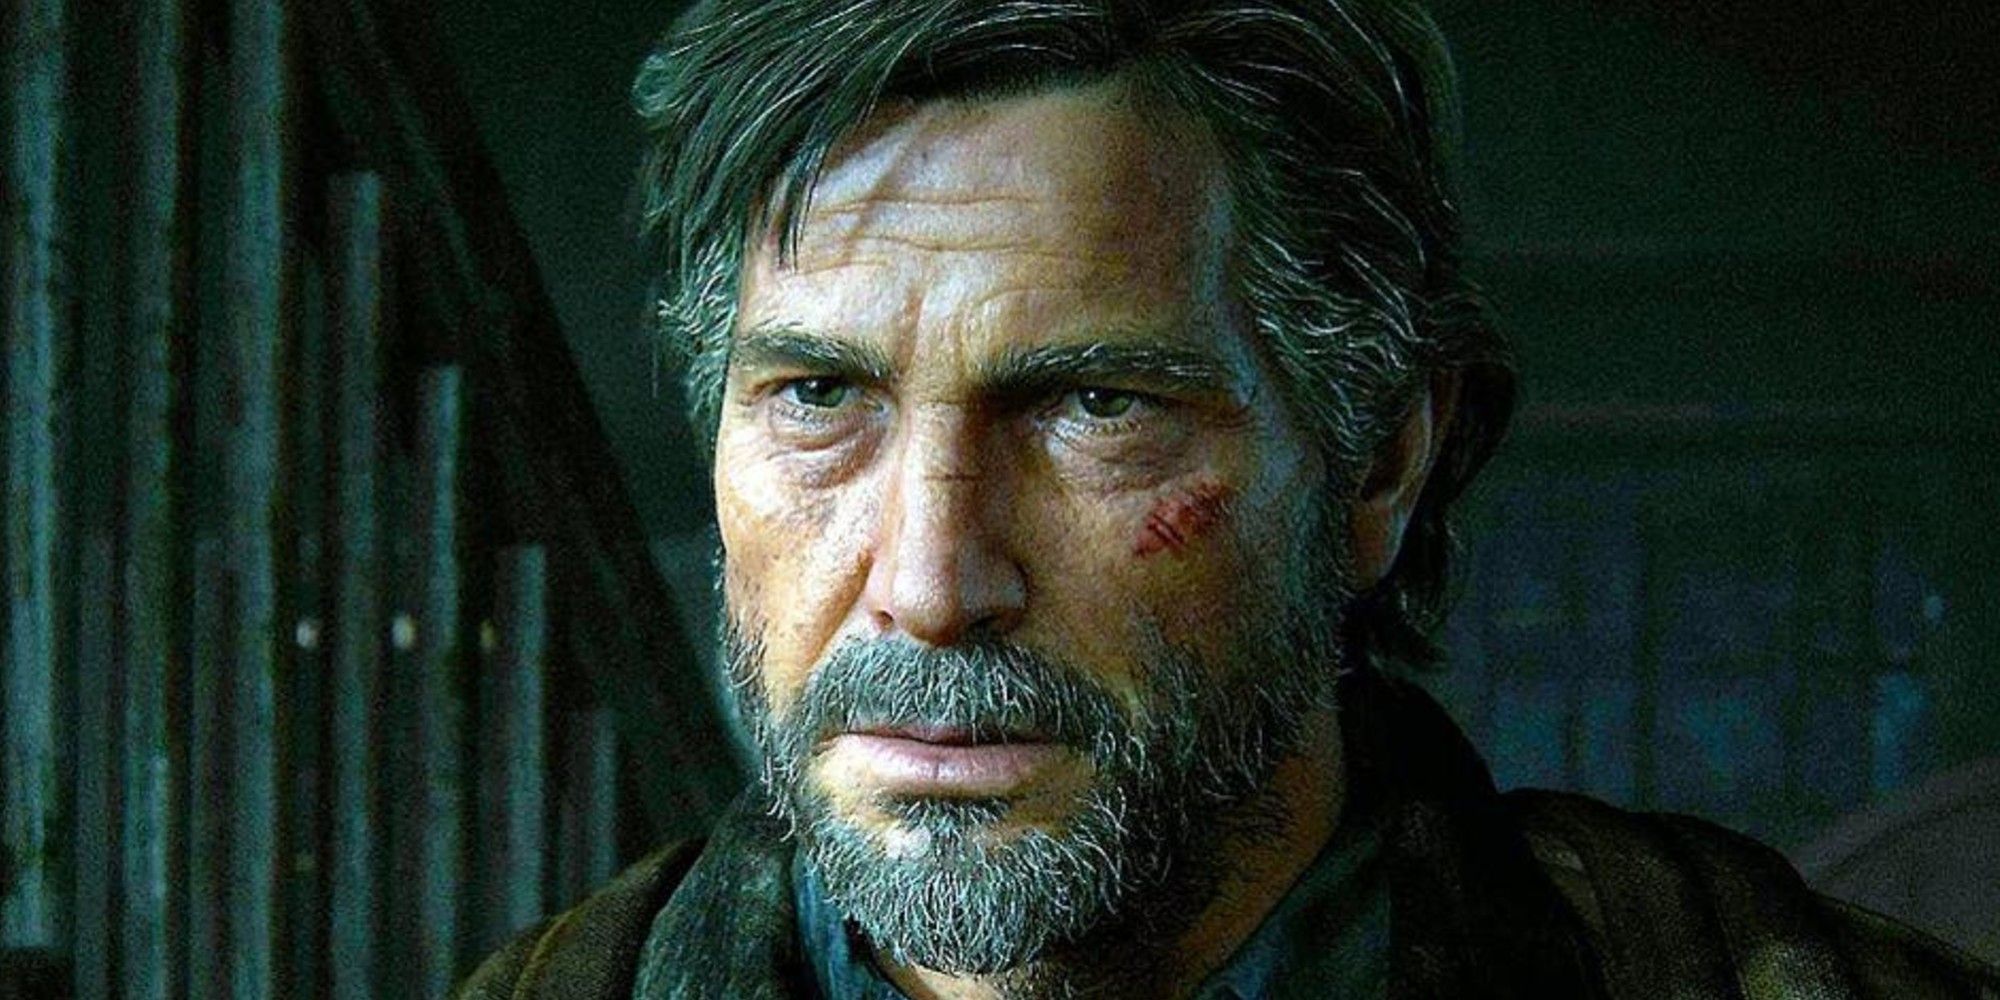 The Last of Us 2' rumors: Joel killed by Fireflies, only a vision